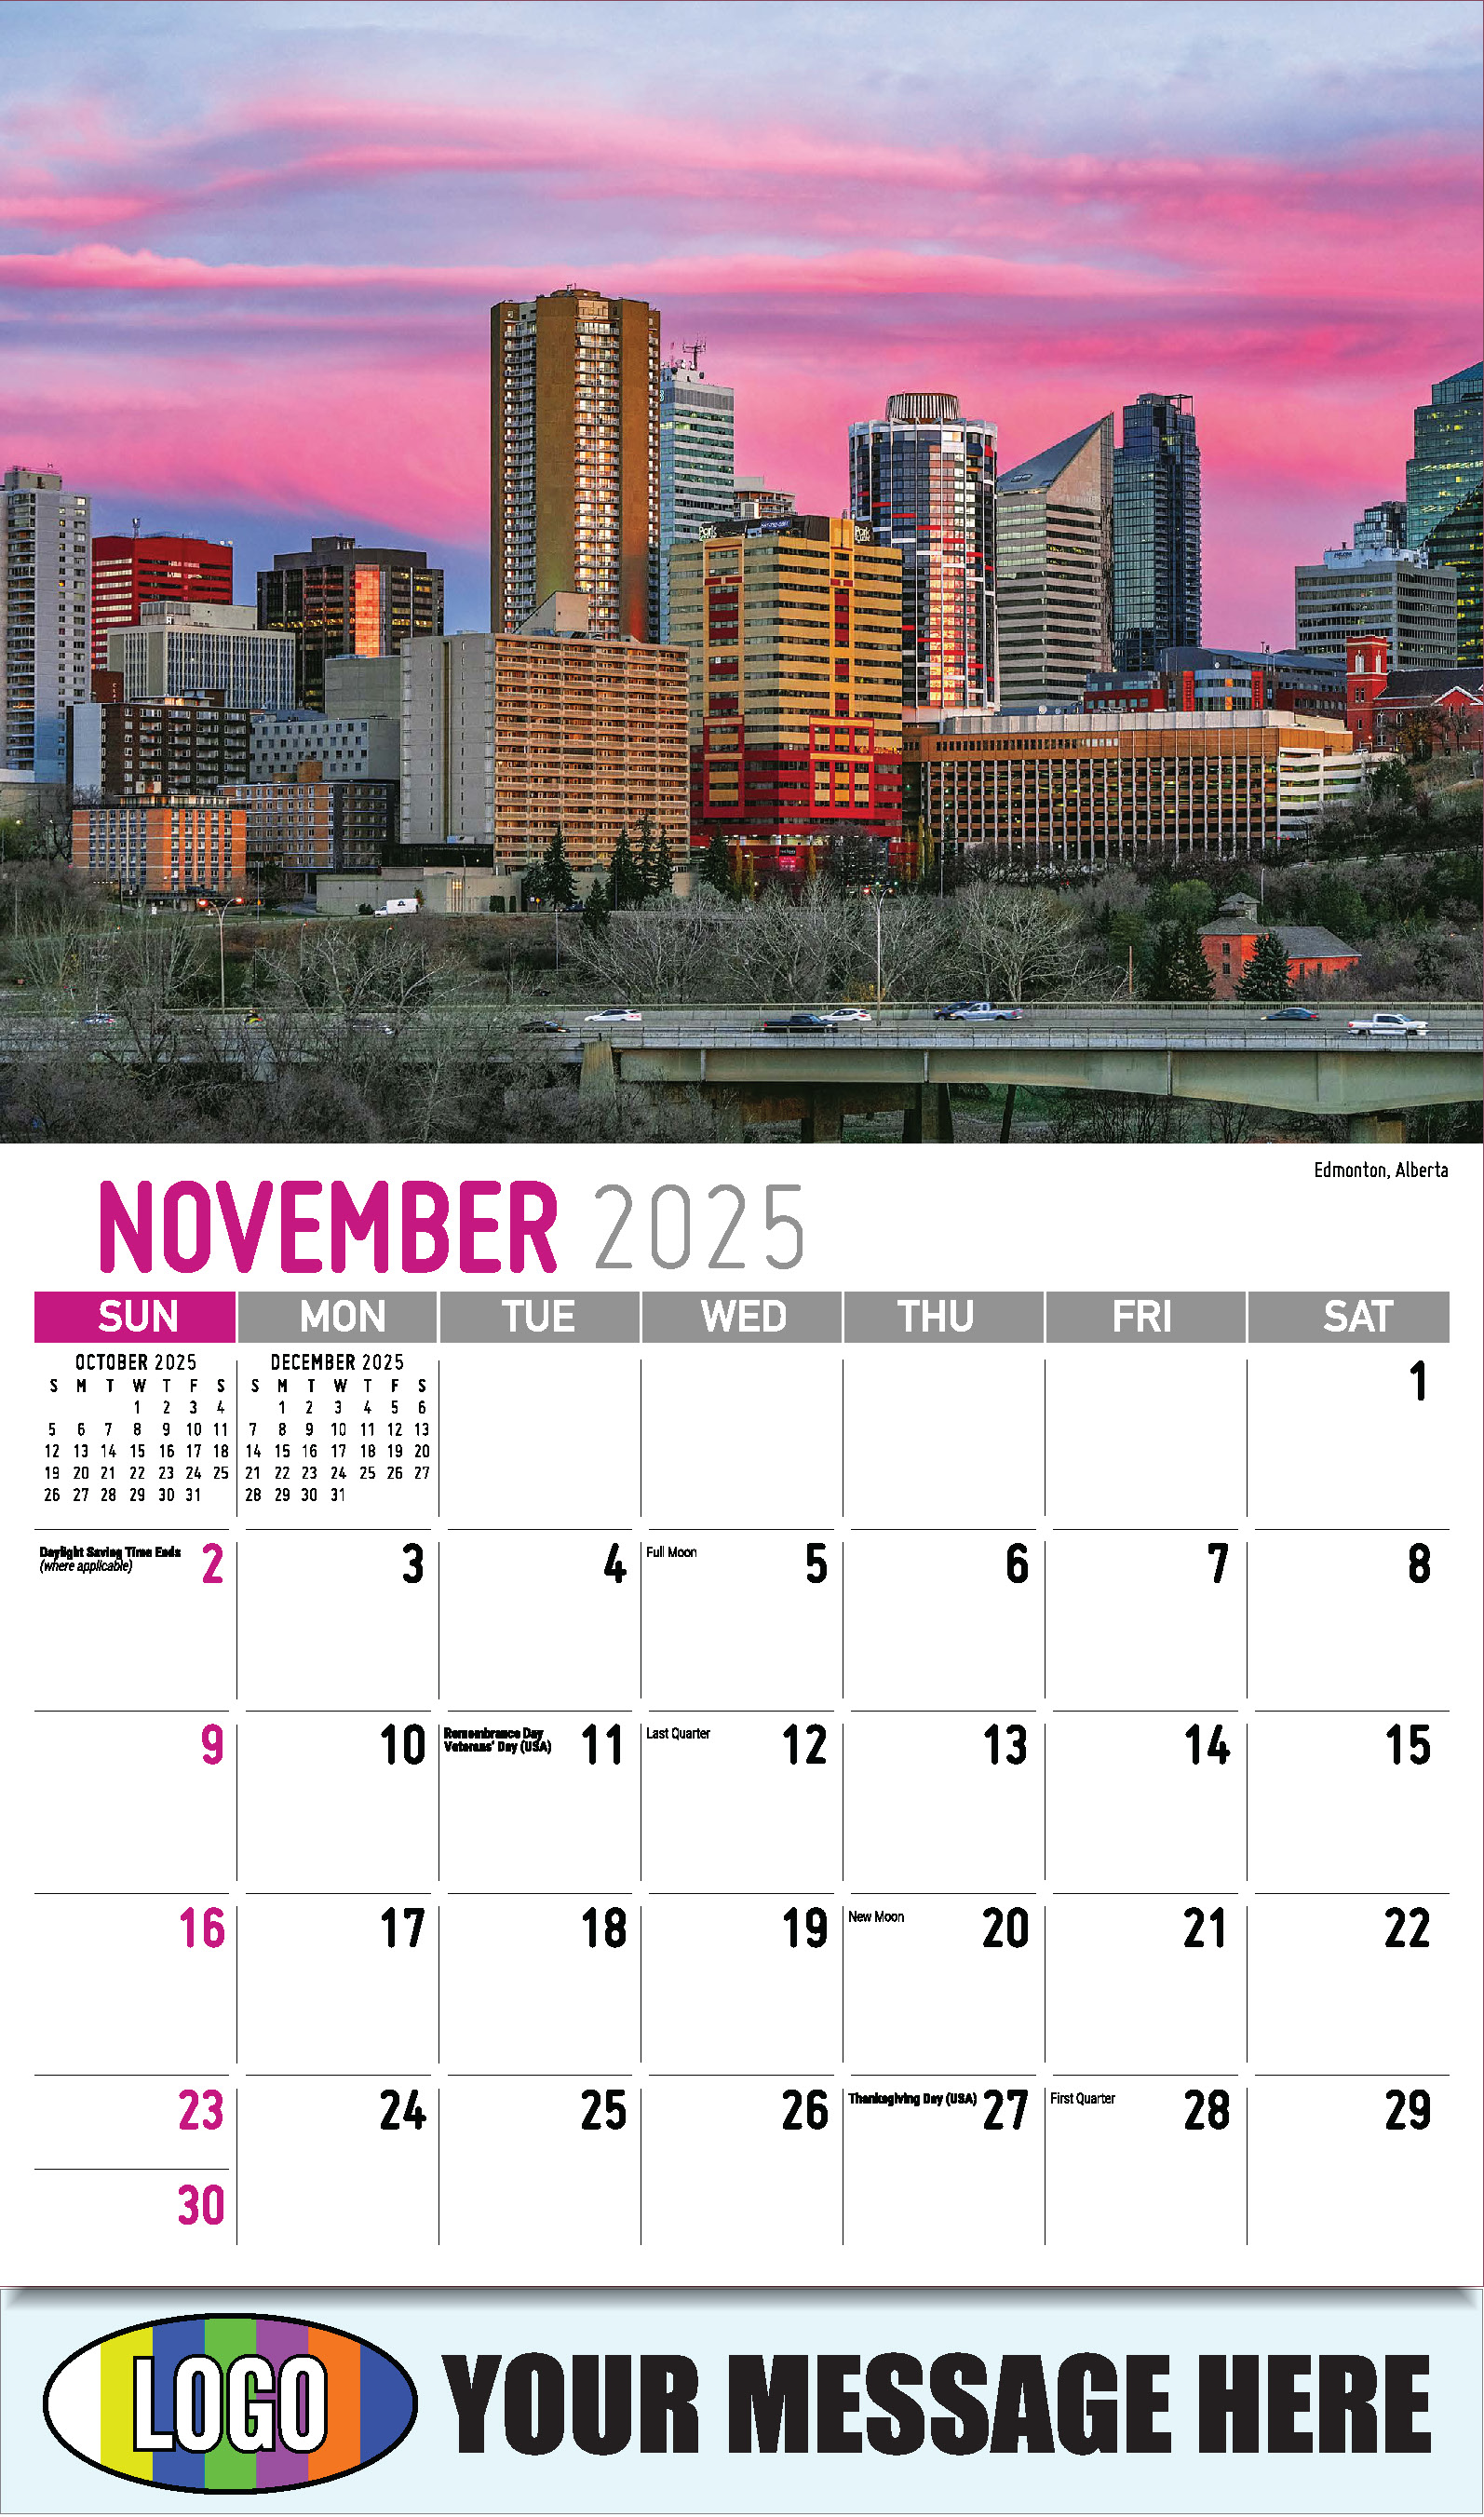 Scenes of Western Canada 2025 Business Promotional Wall Calendar - November